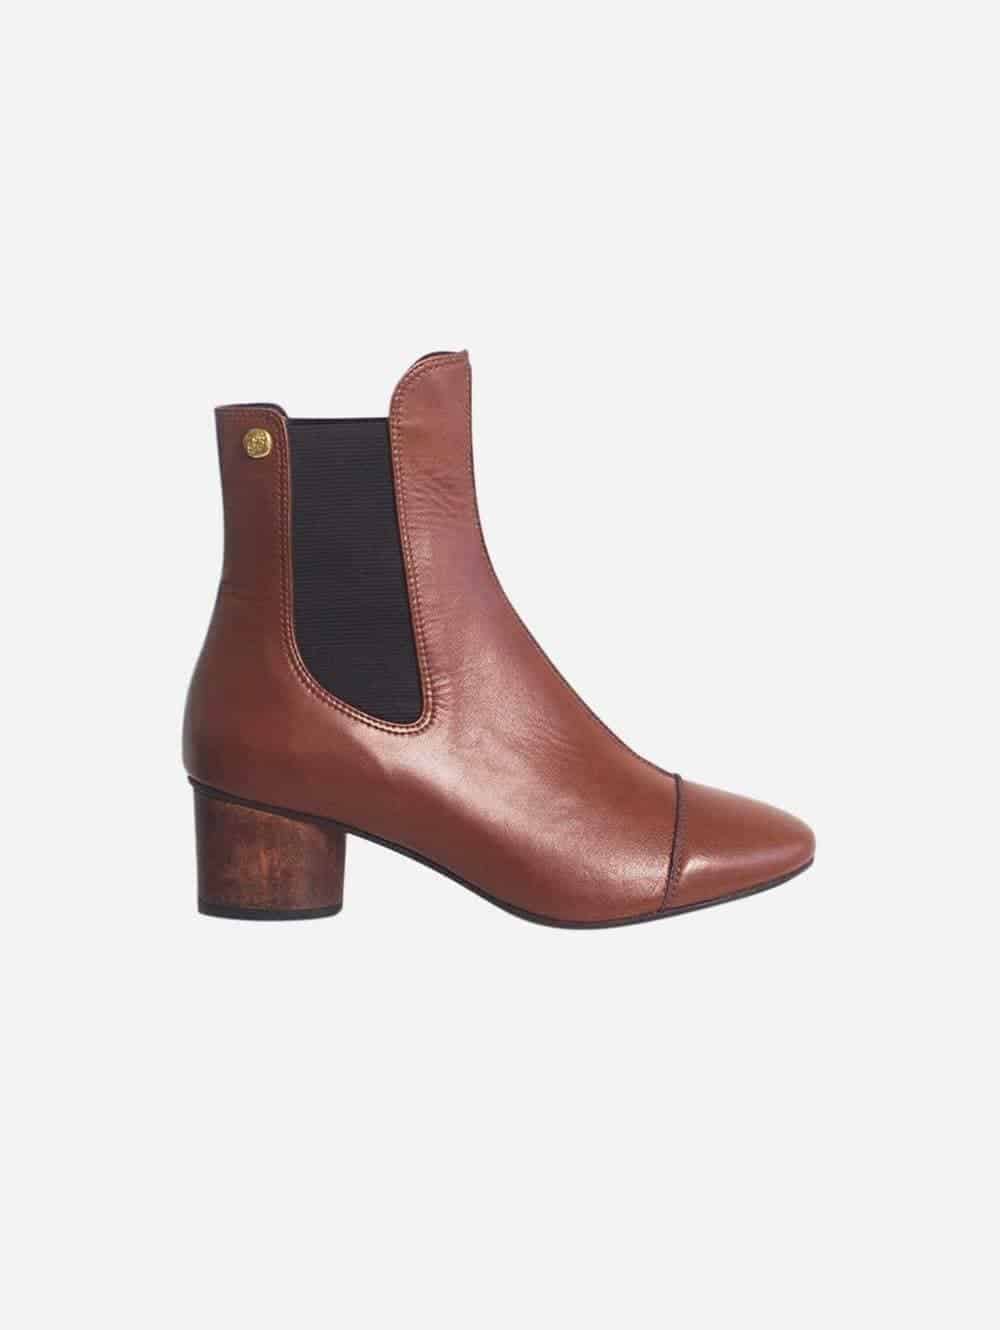 vegan chelsea boots brown from Taylor and Thomas